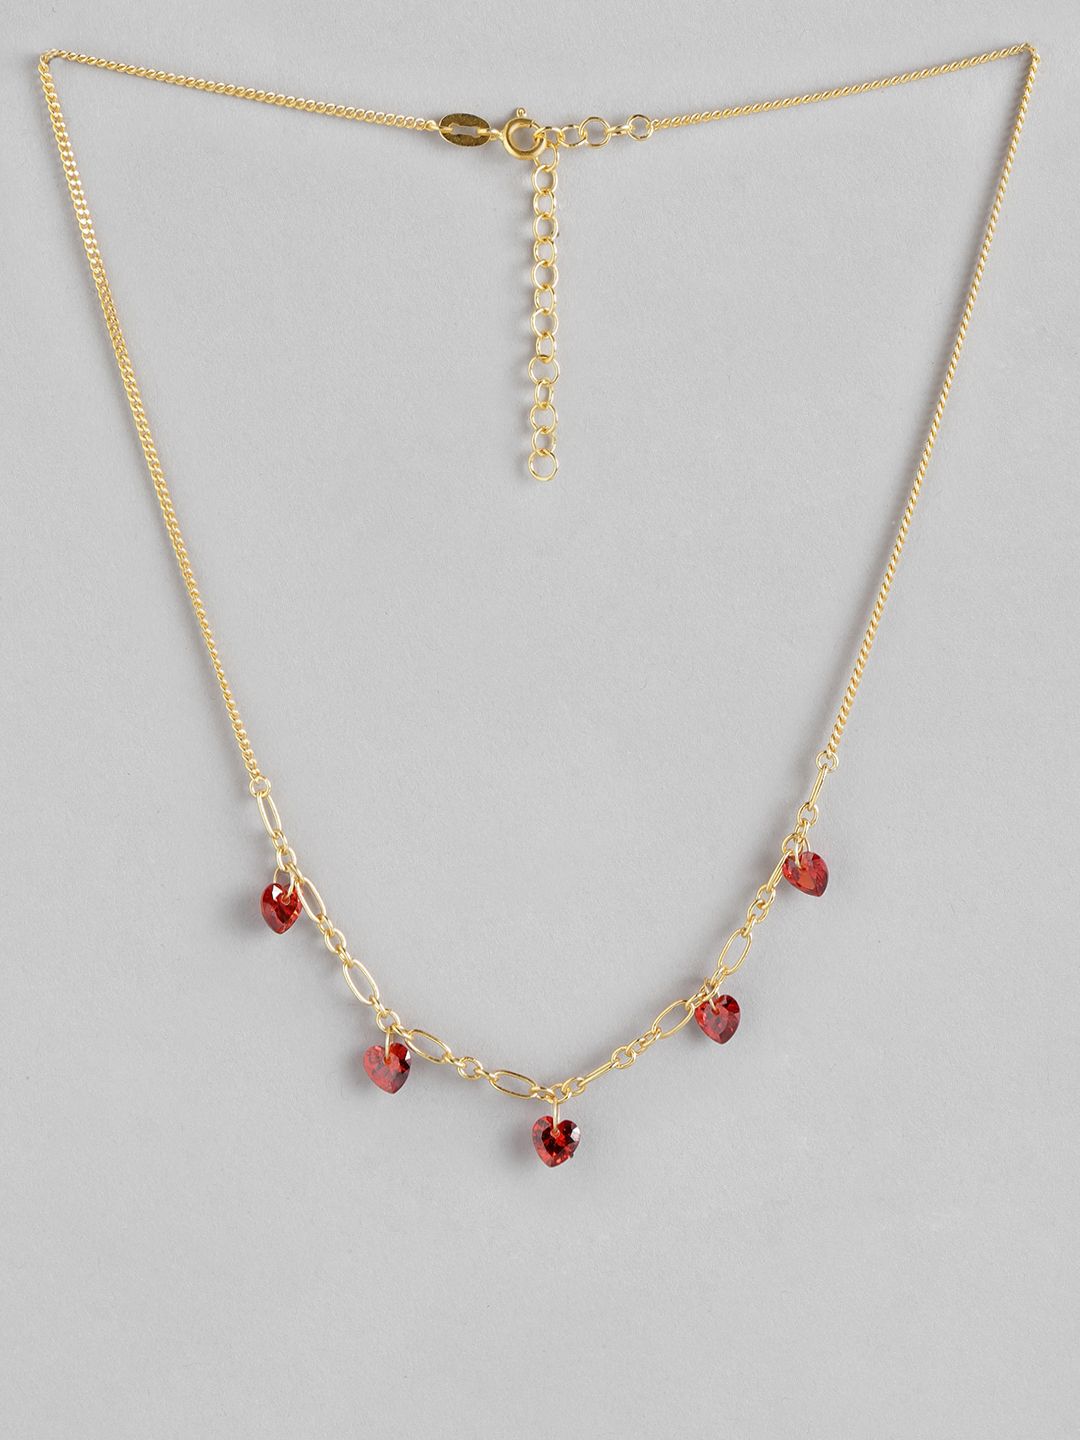 Carlton London Gold-Plated Red CZ Studded Handcrafted Chain Price in India